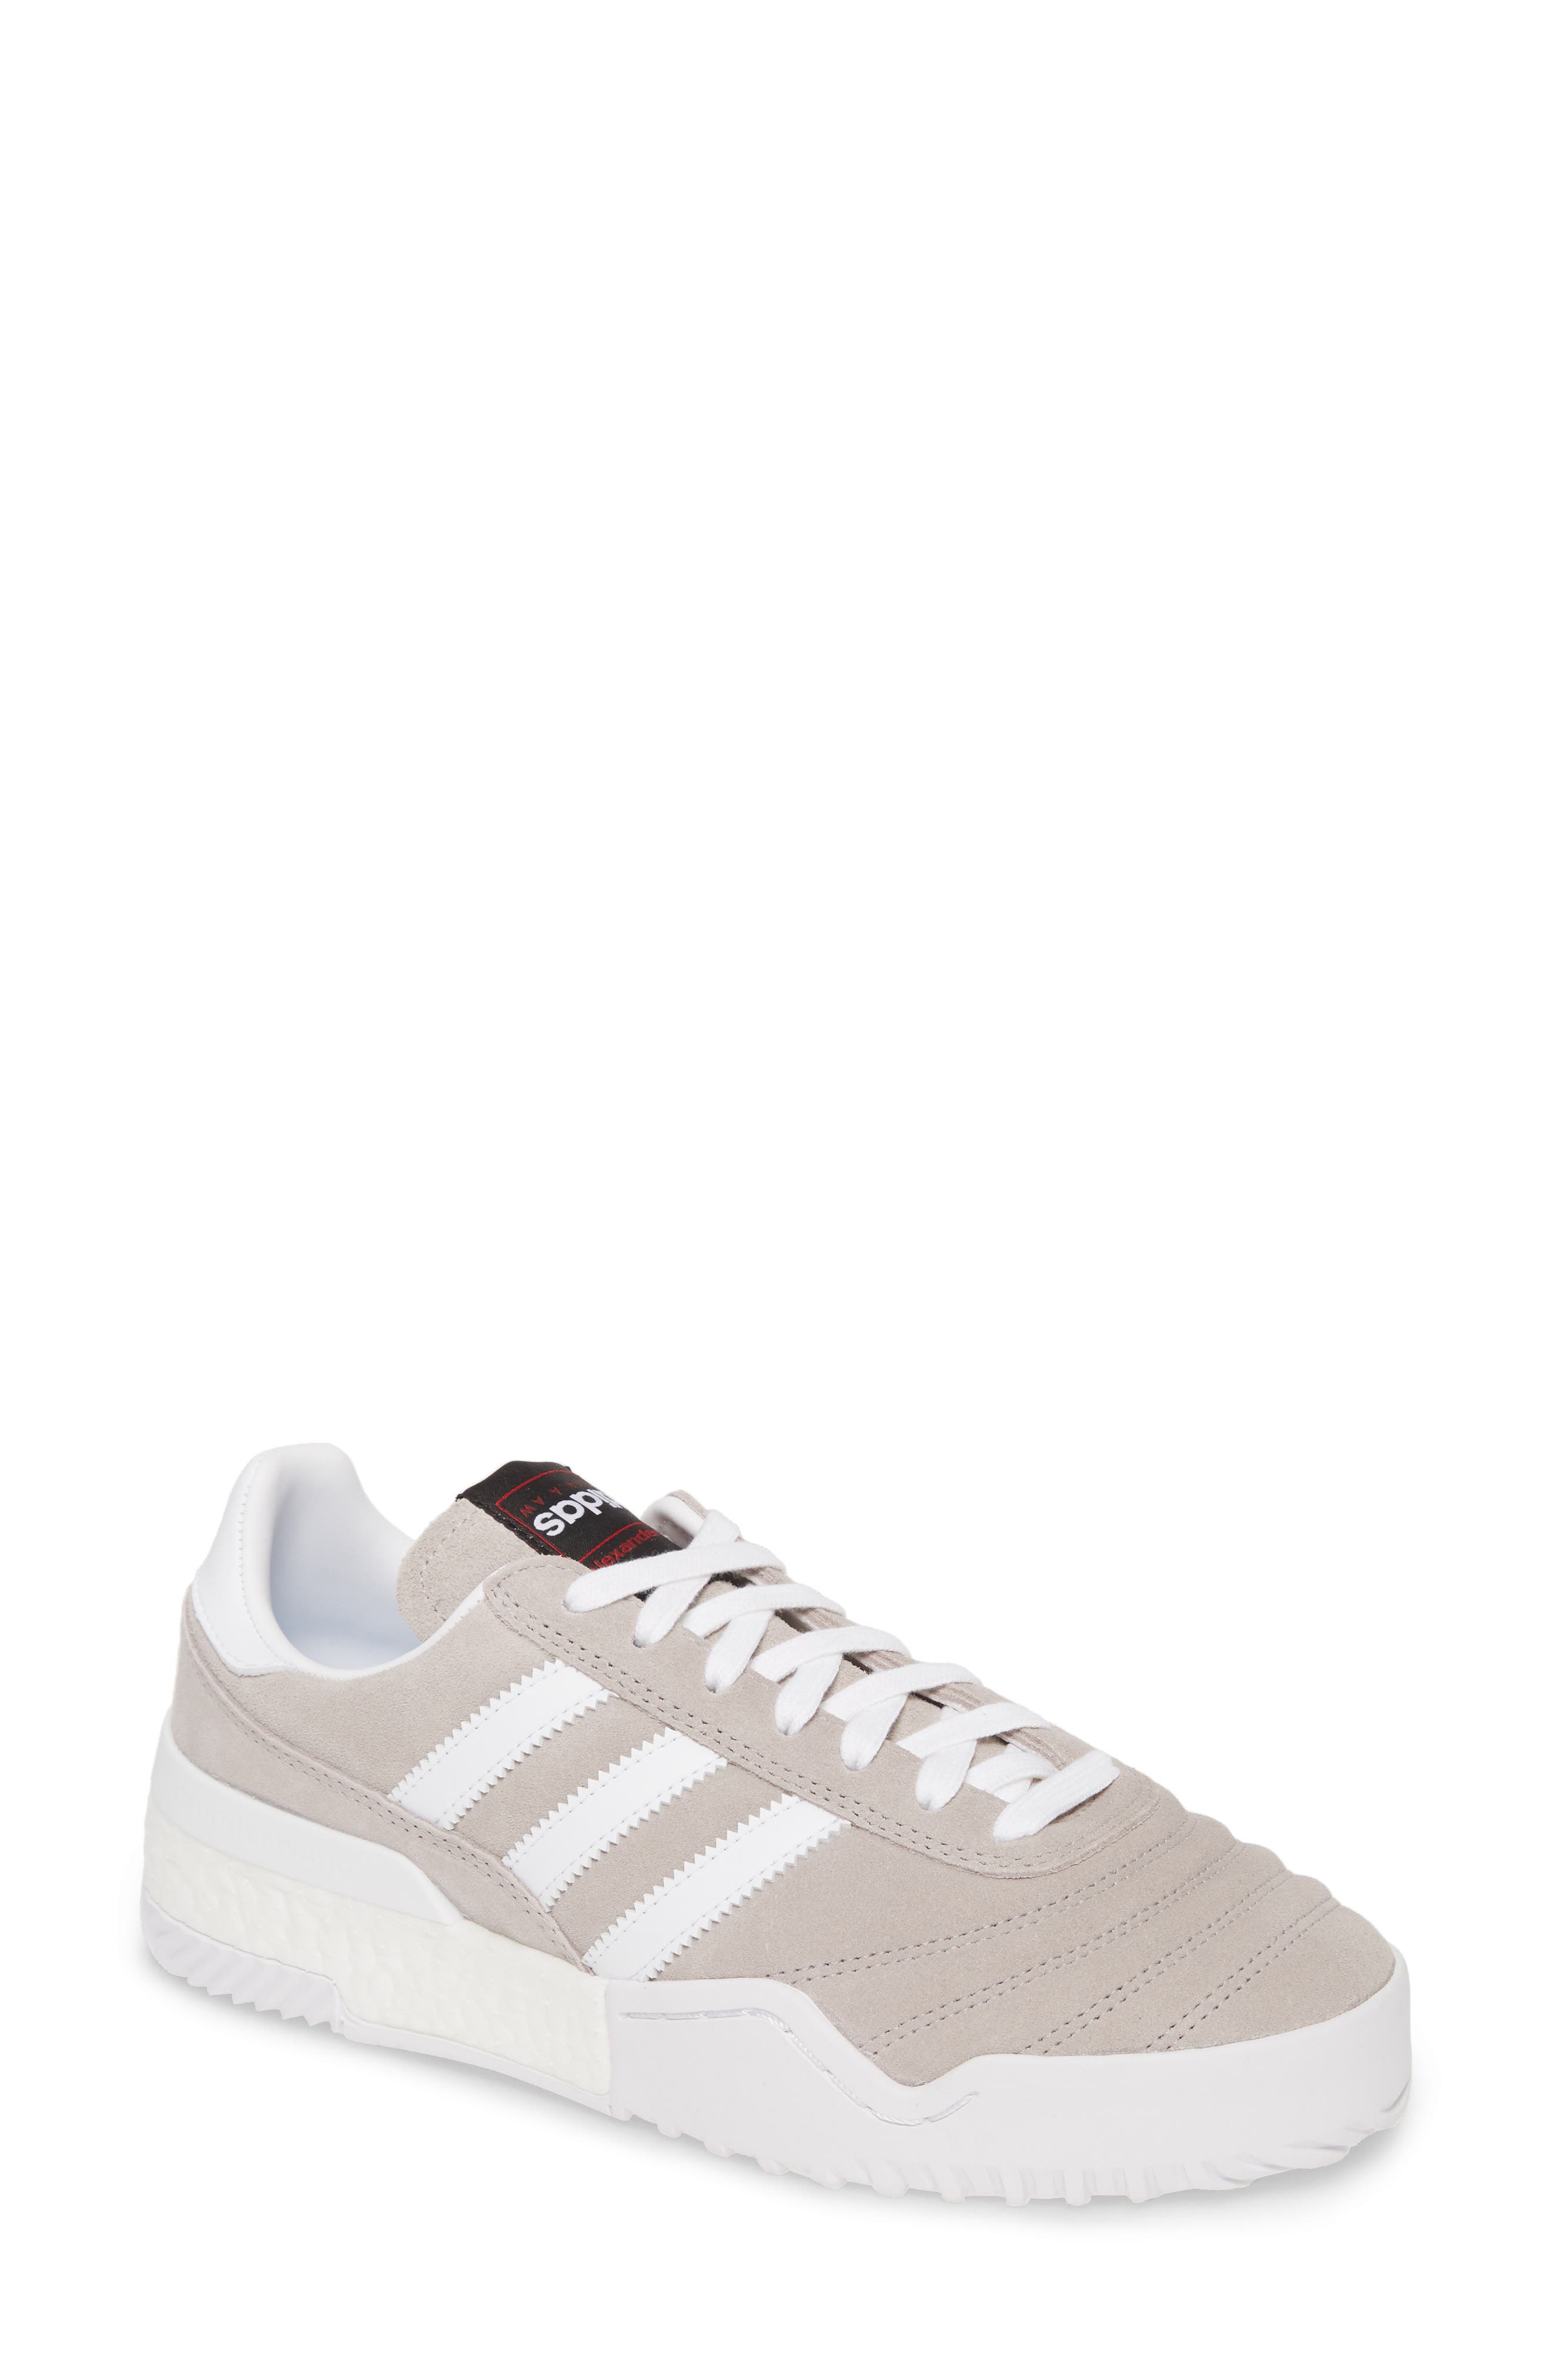 adidas soccer casual shoes